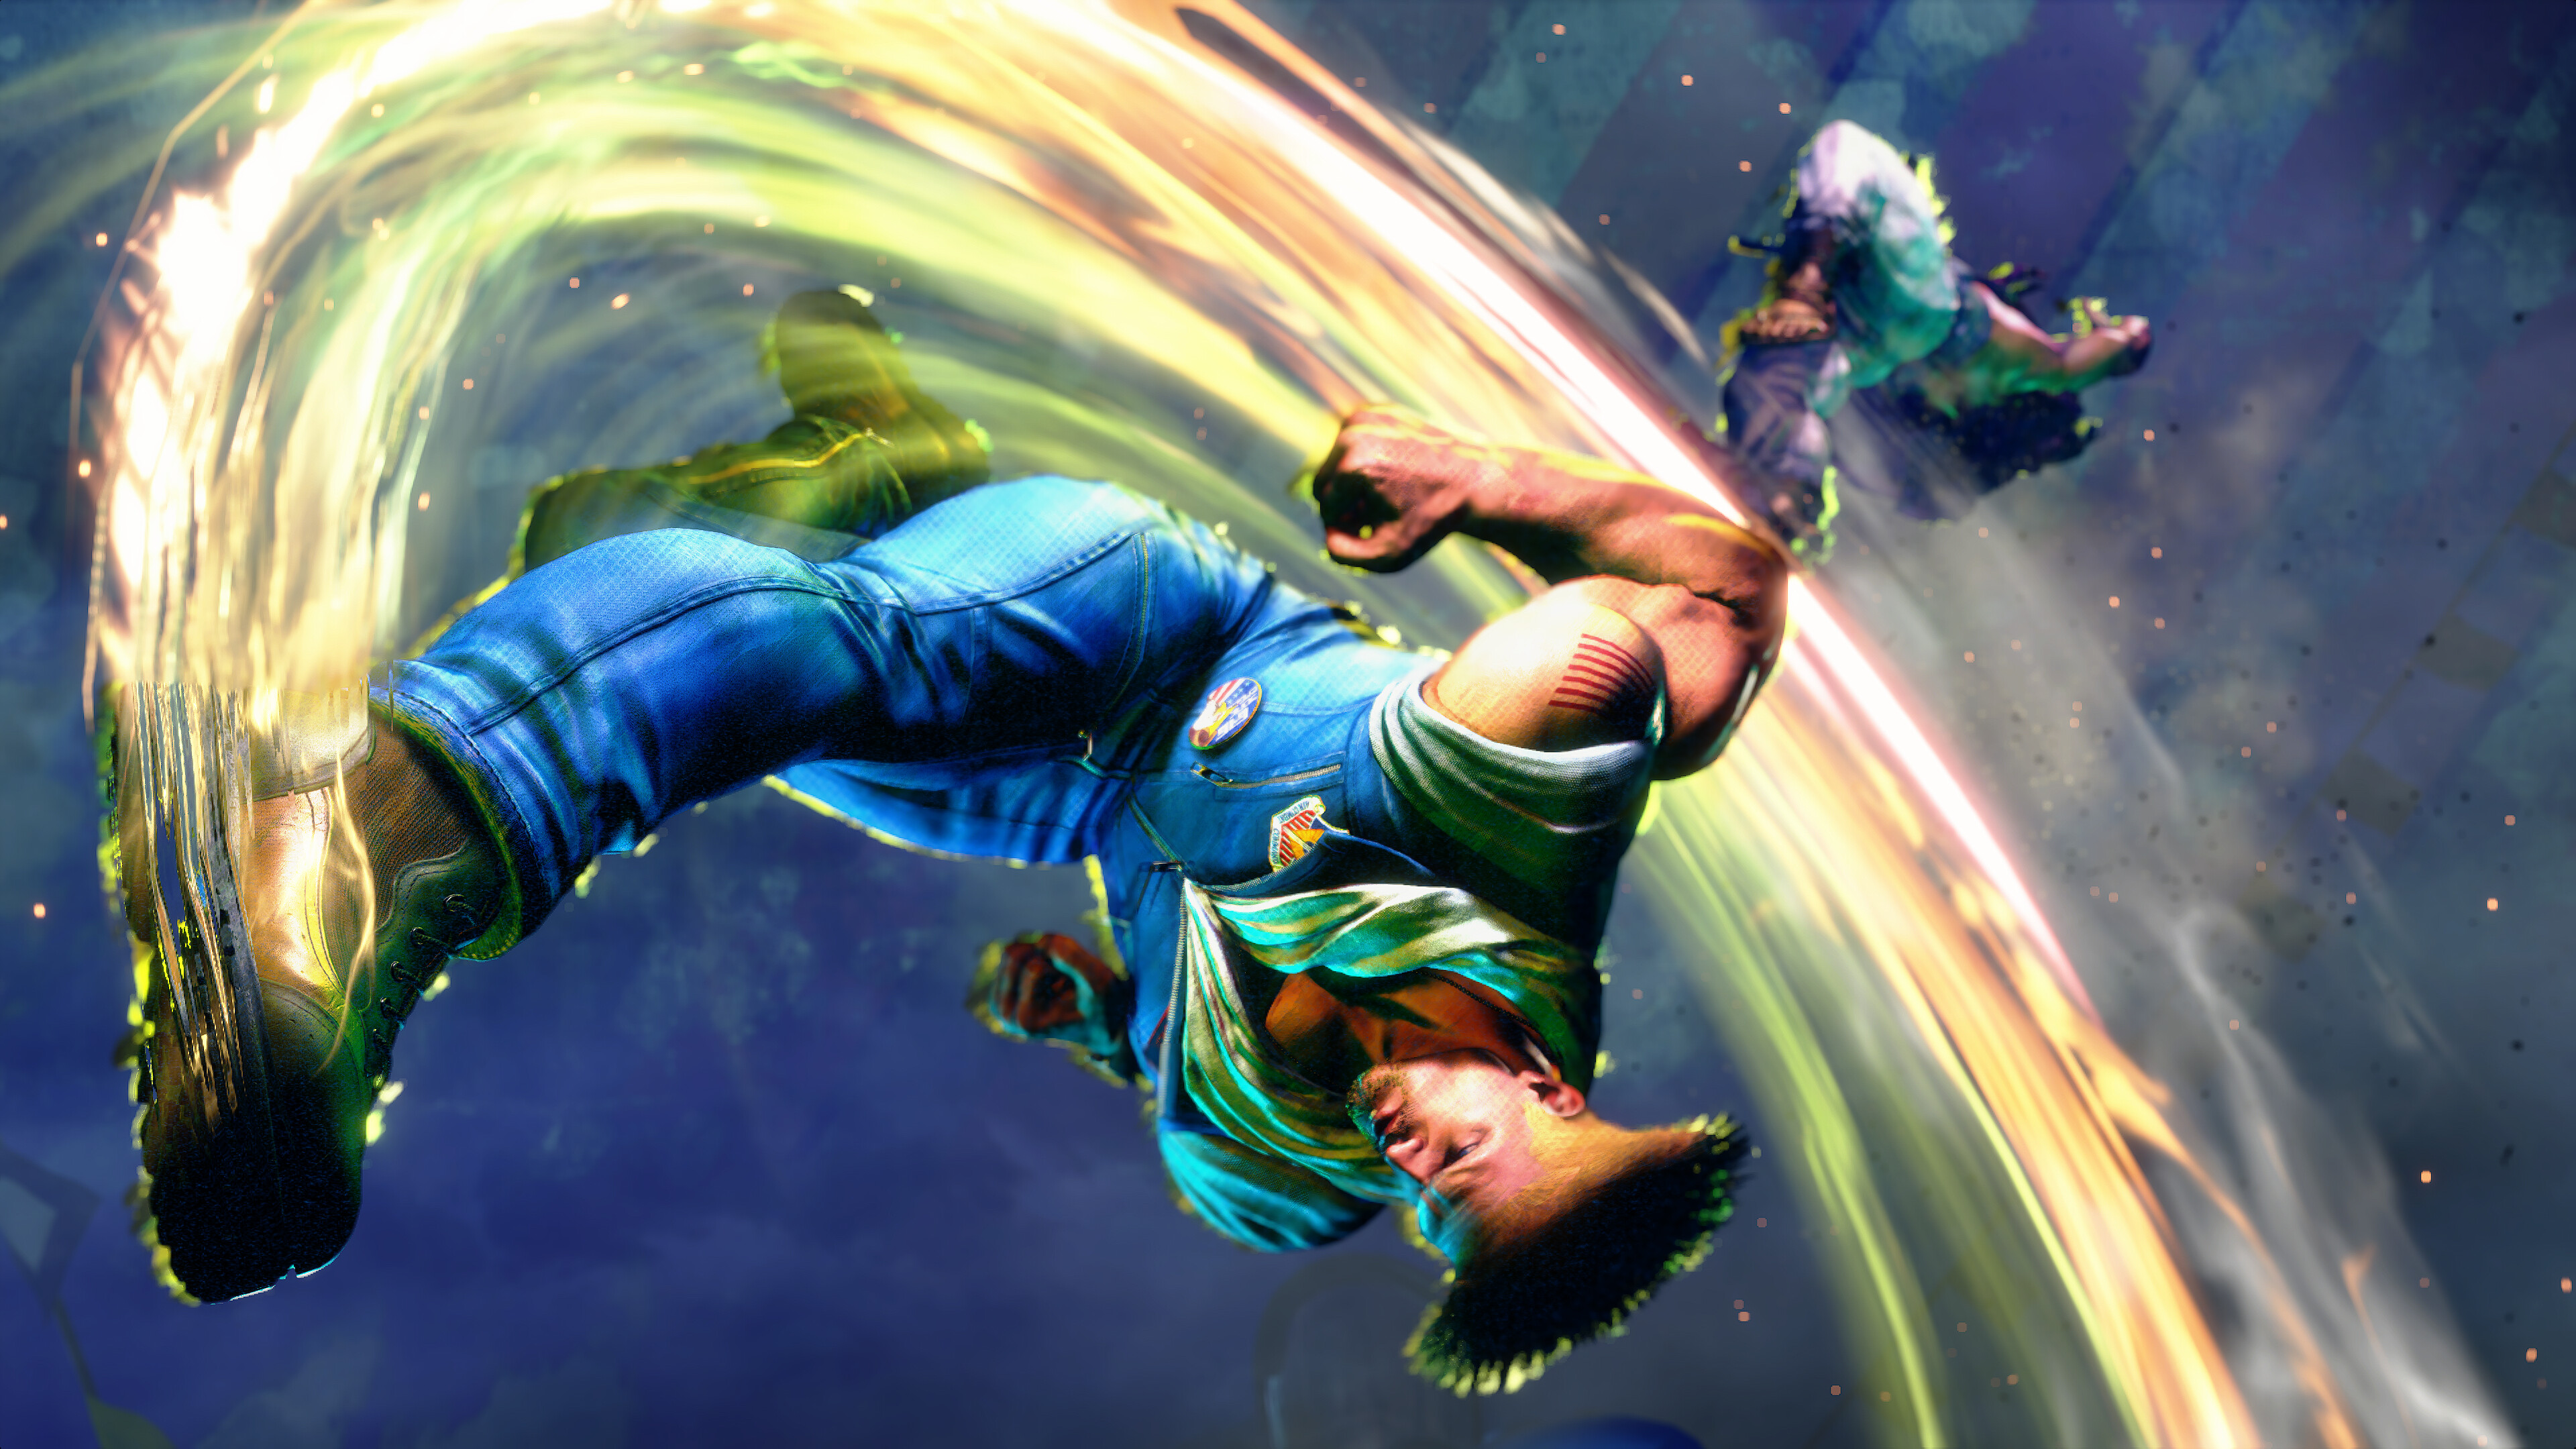 Guile launches Ryu into the air with a Sonic Kick in Street Fighter 6. 